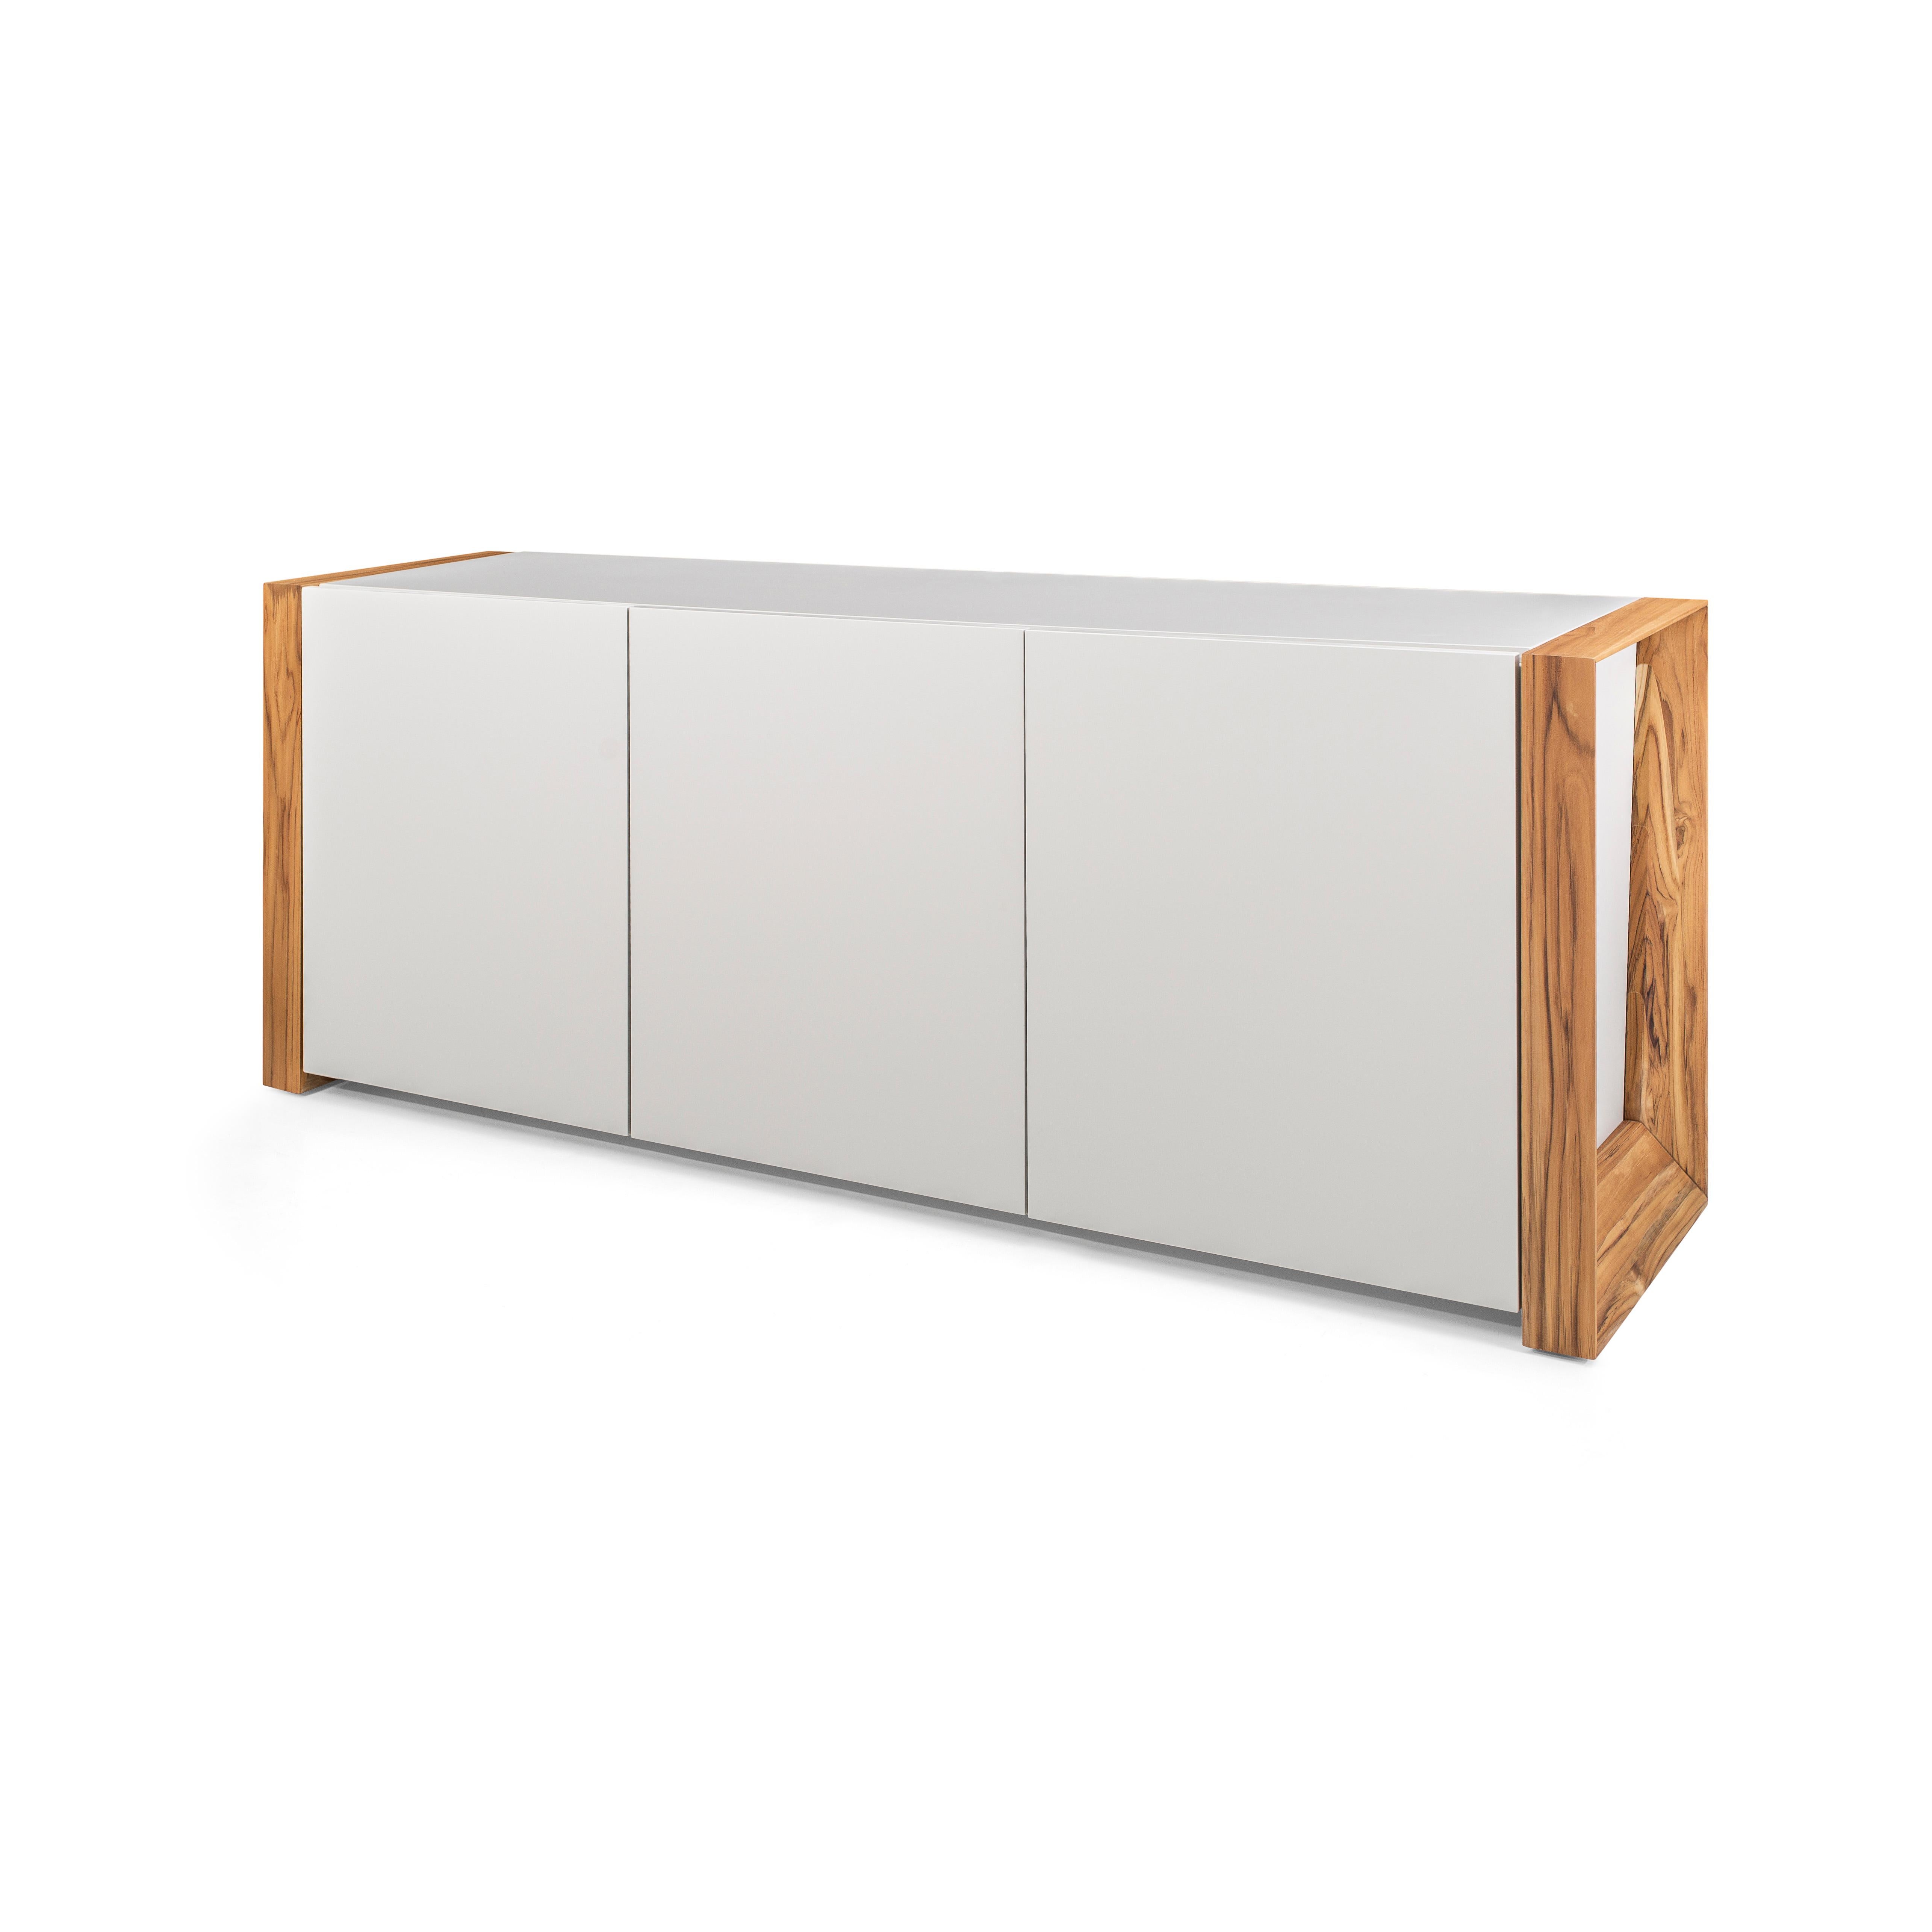 Brazilian Masp Sideboard in White Finish and Teak Wood Finish End Frames For Sale